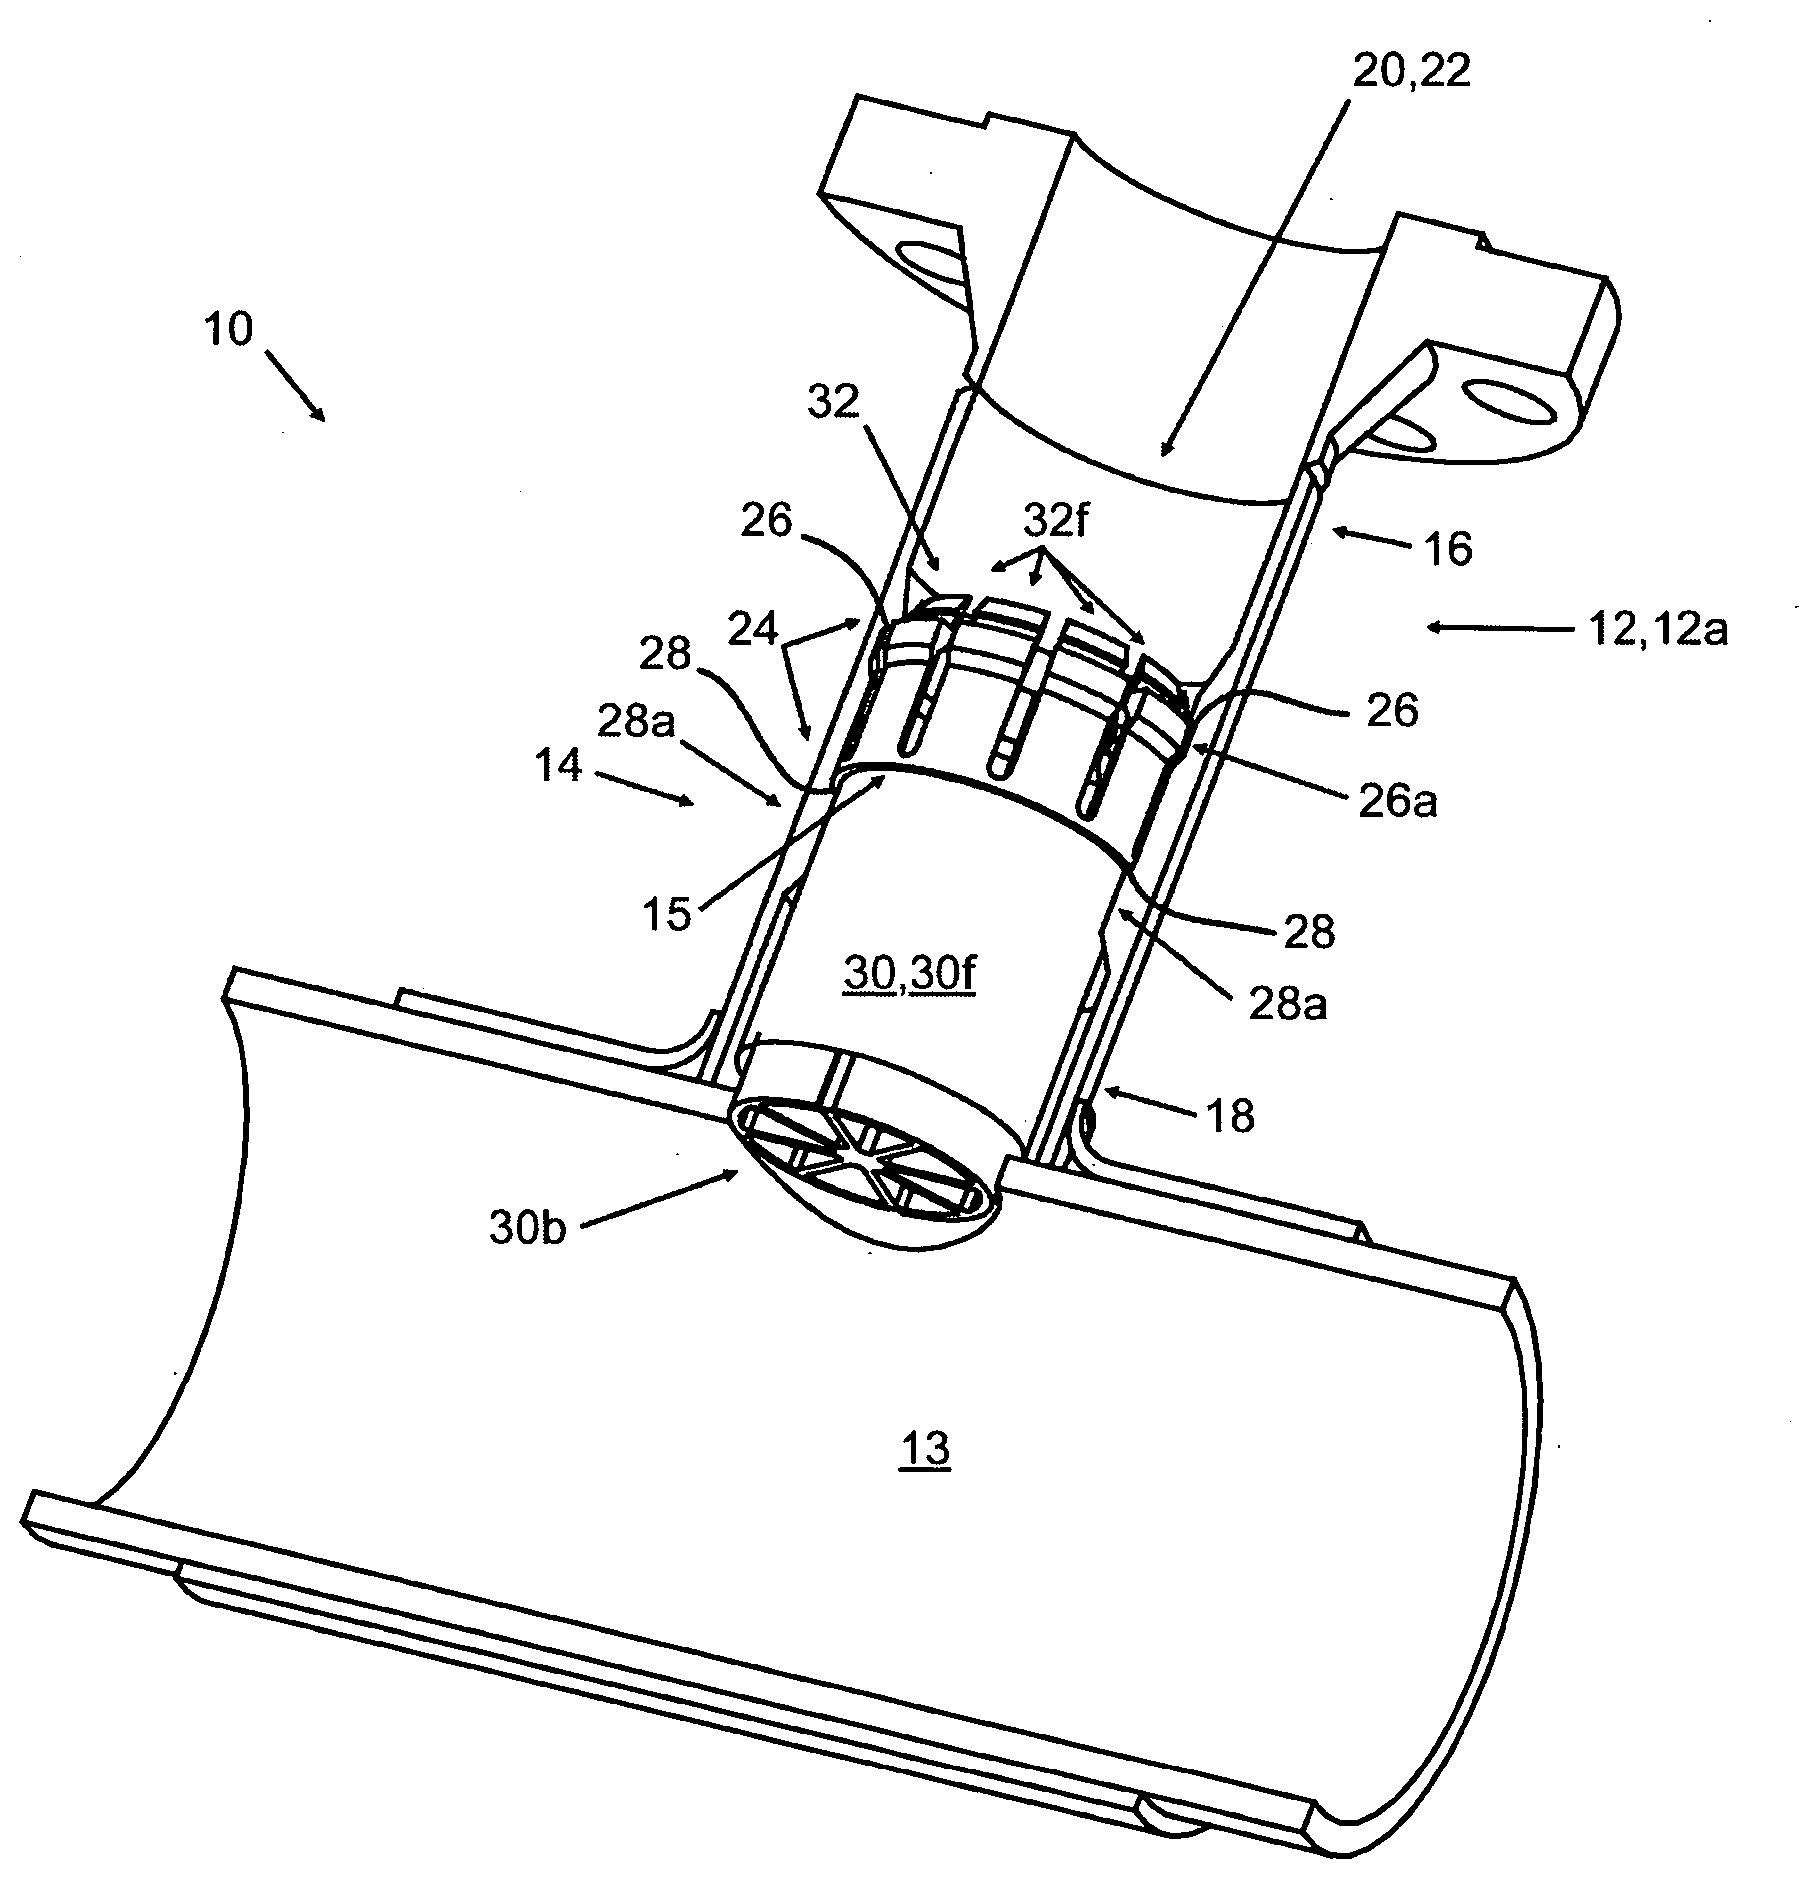 Removable closure system and plug for conduit